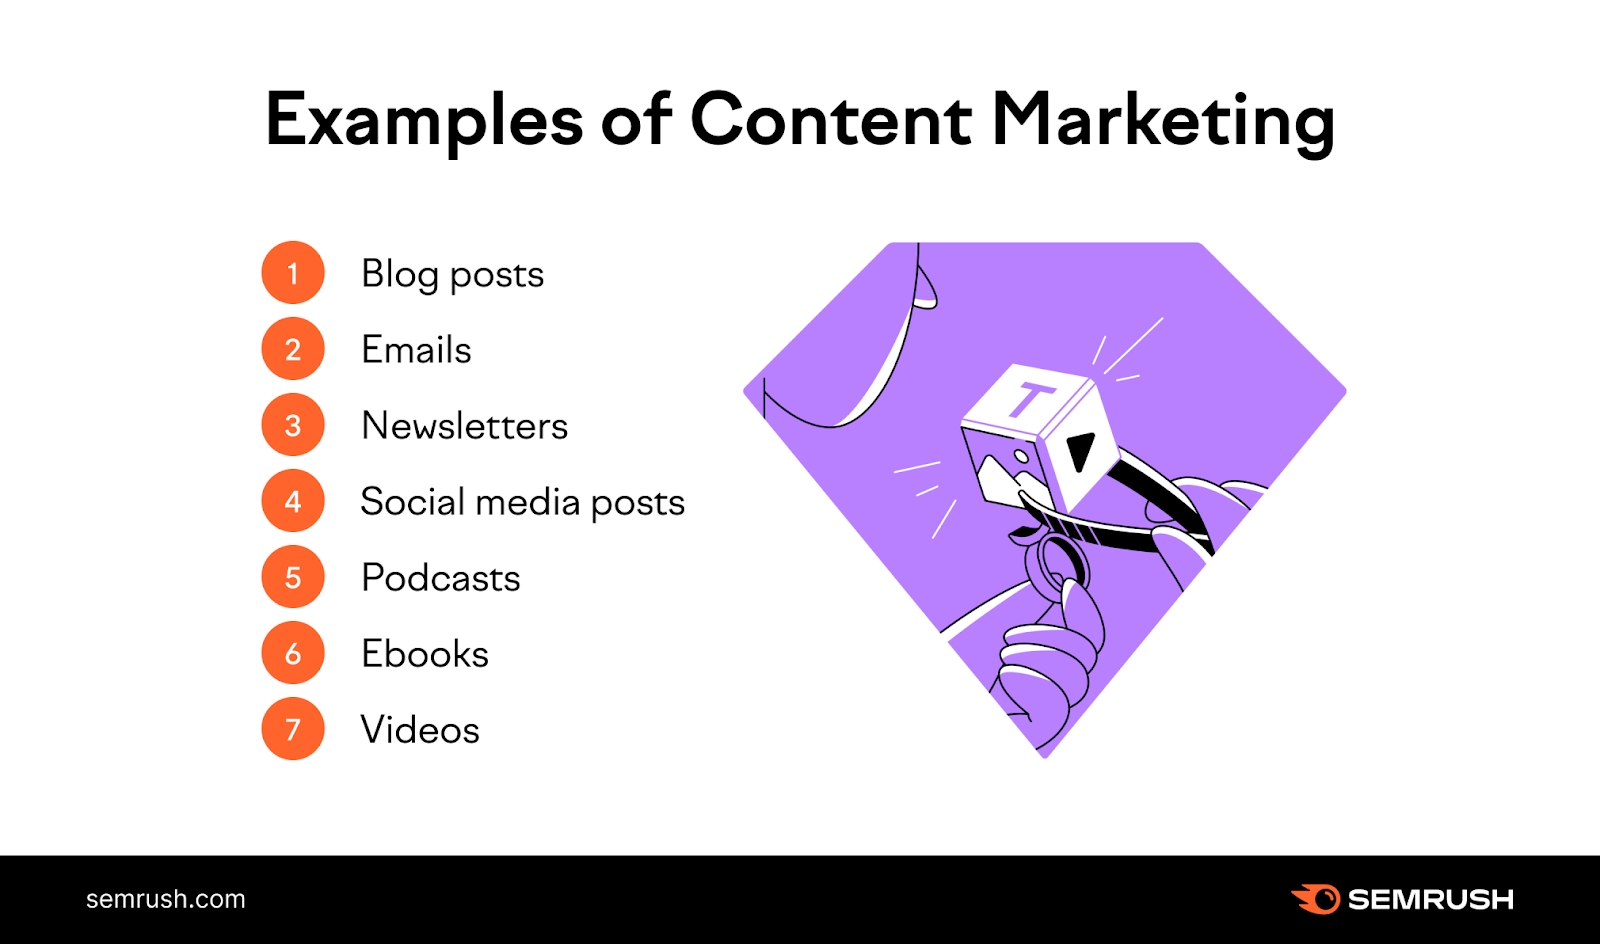 An image on examples of content marketing, including blog posts, emails, newsletters, social media posts, podcasts, ebooks and videos